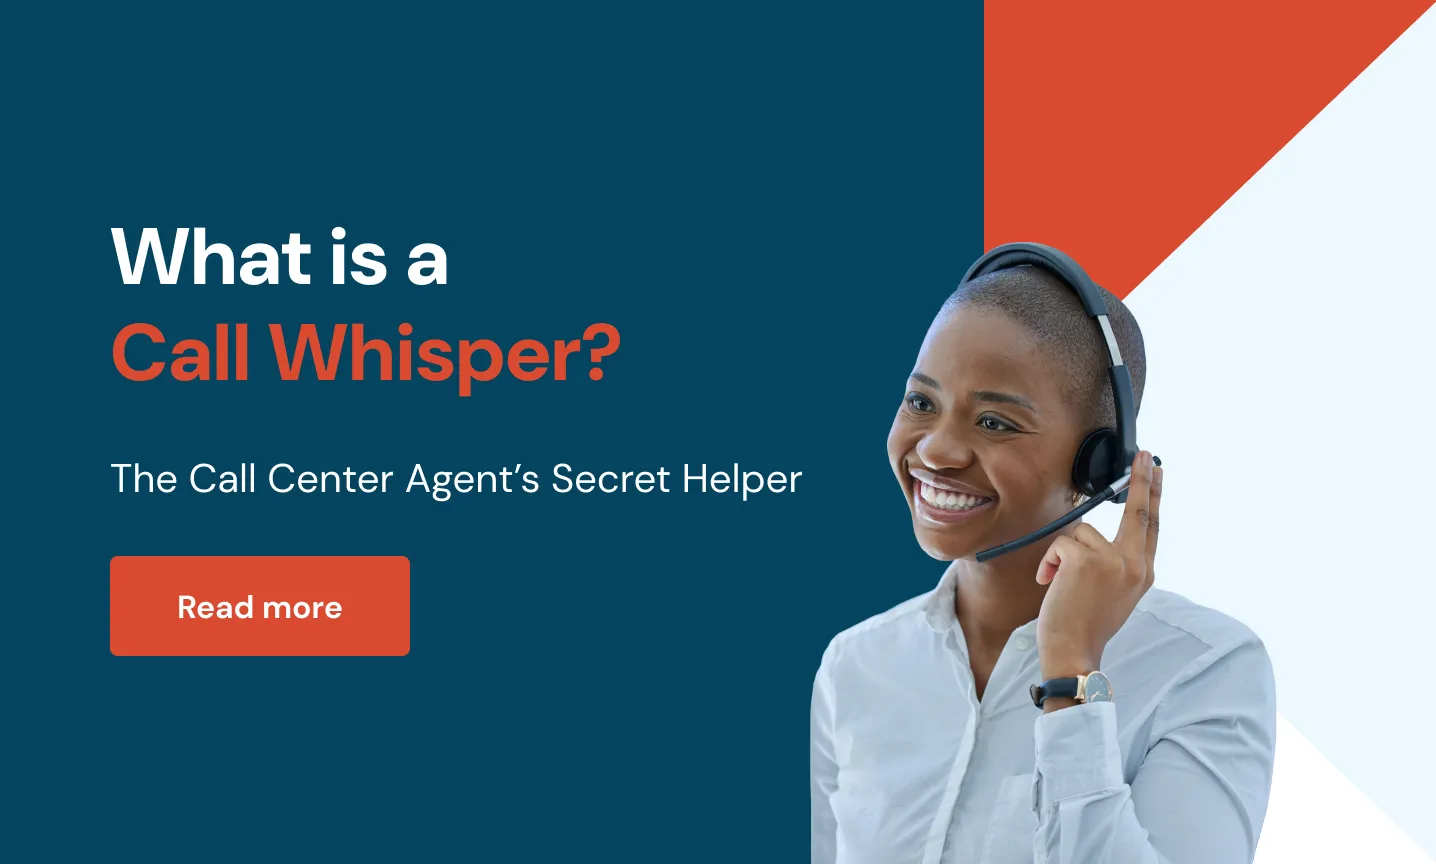 What is a Call Whisper?